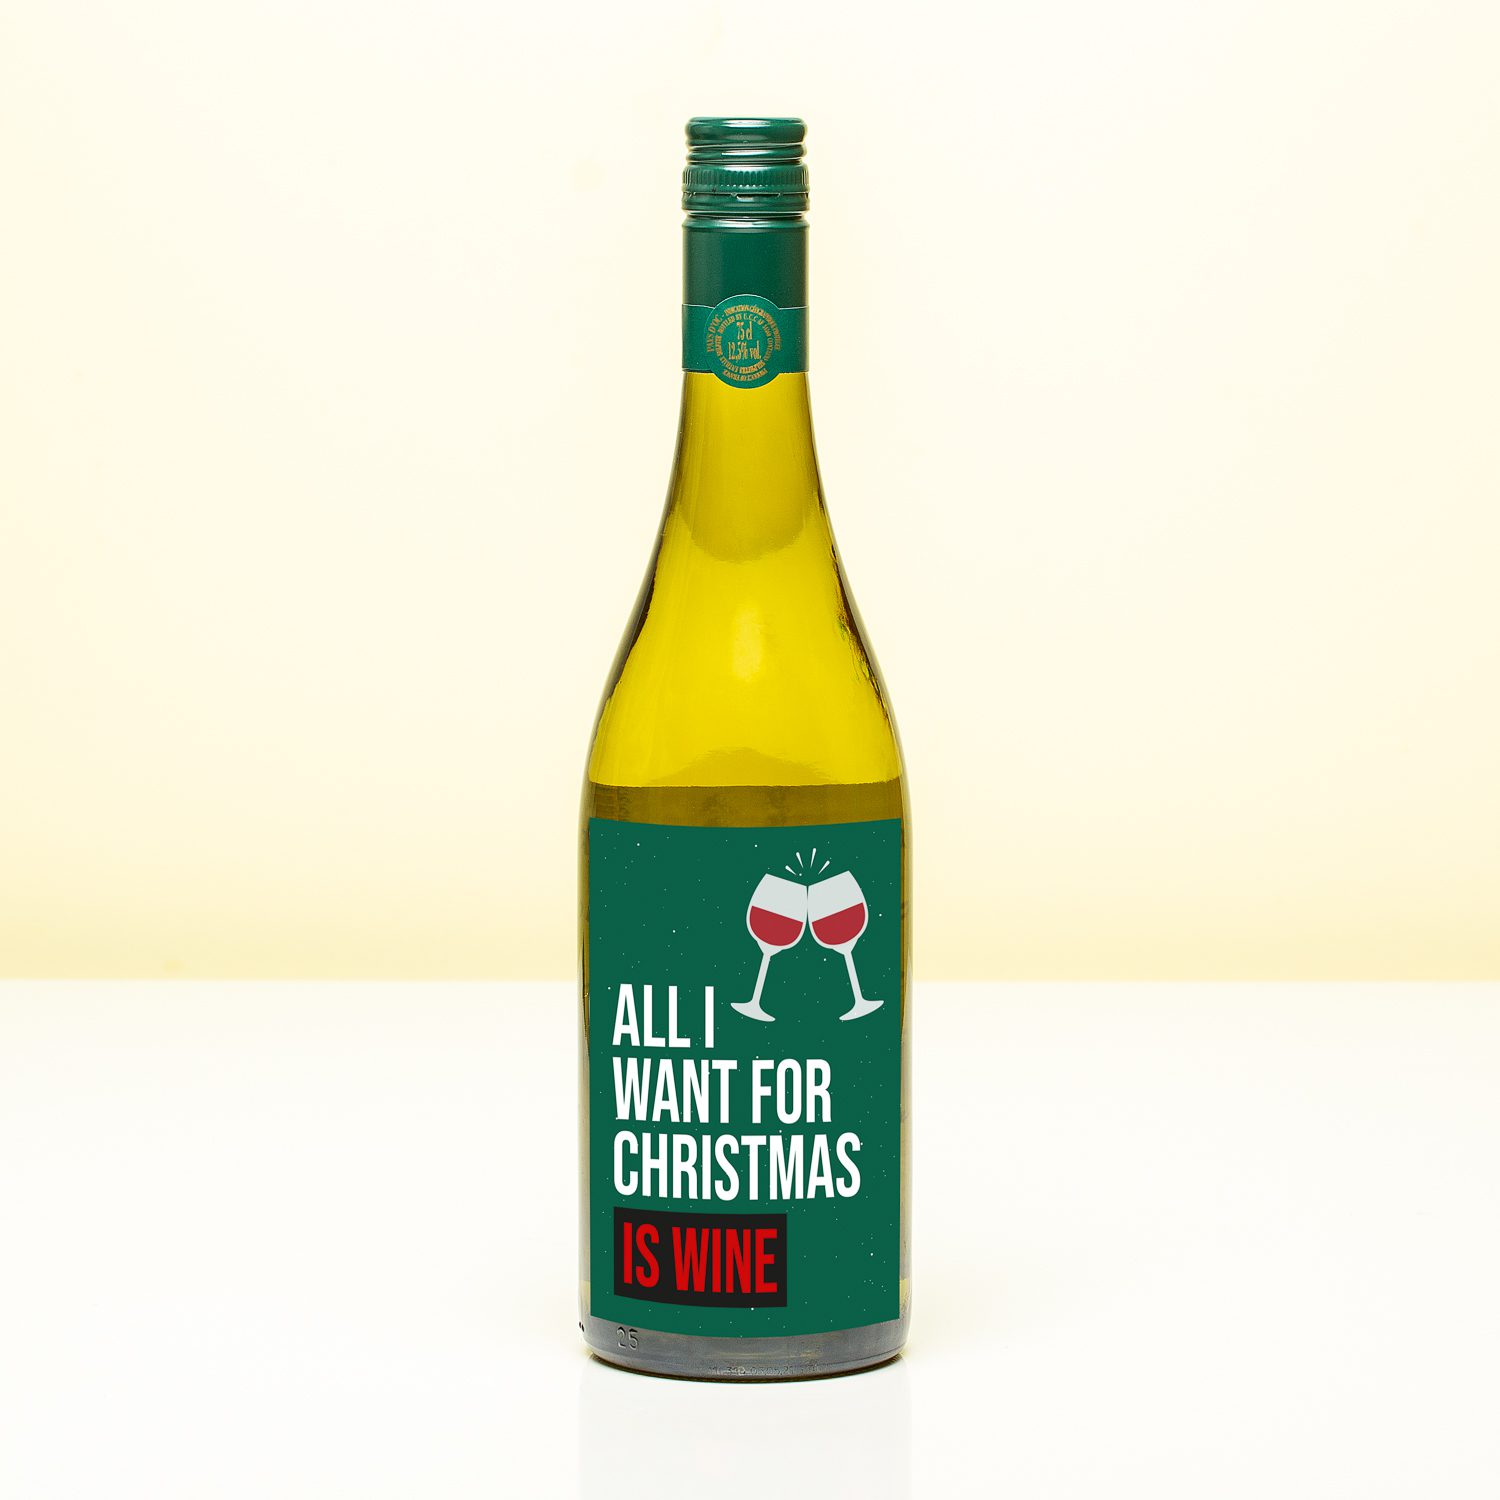 Kerst Wijnfles All I Want For Christmas Is Wine - Wit (Sauvignon Blanc)